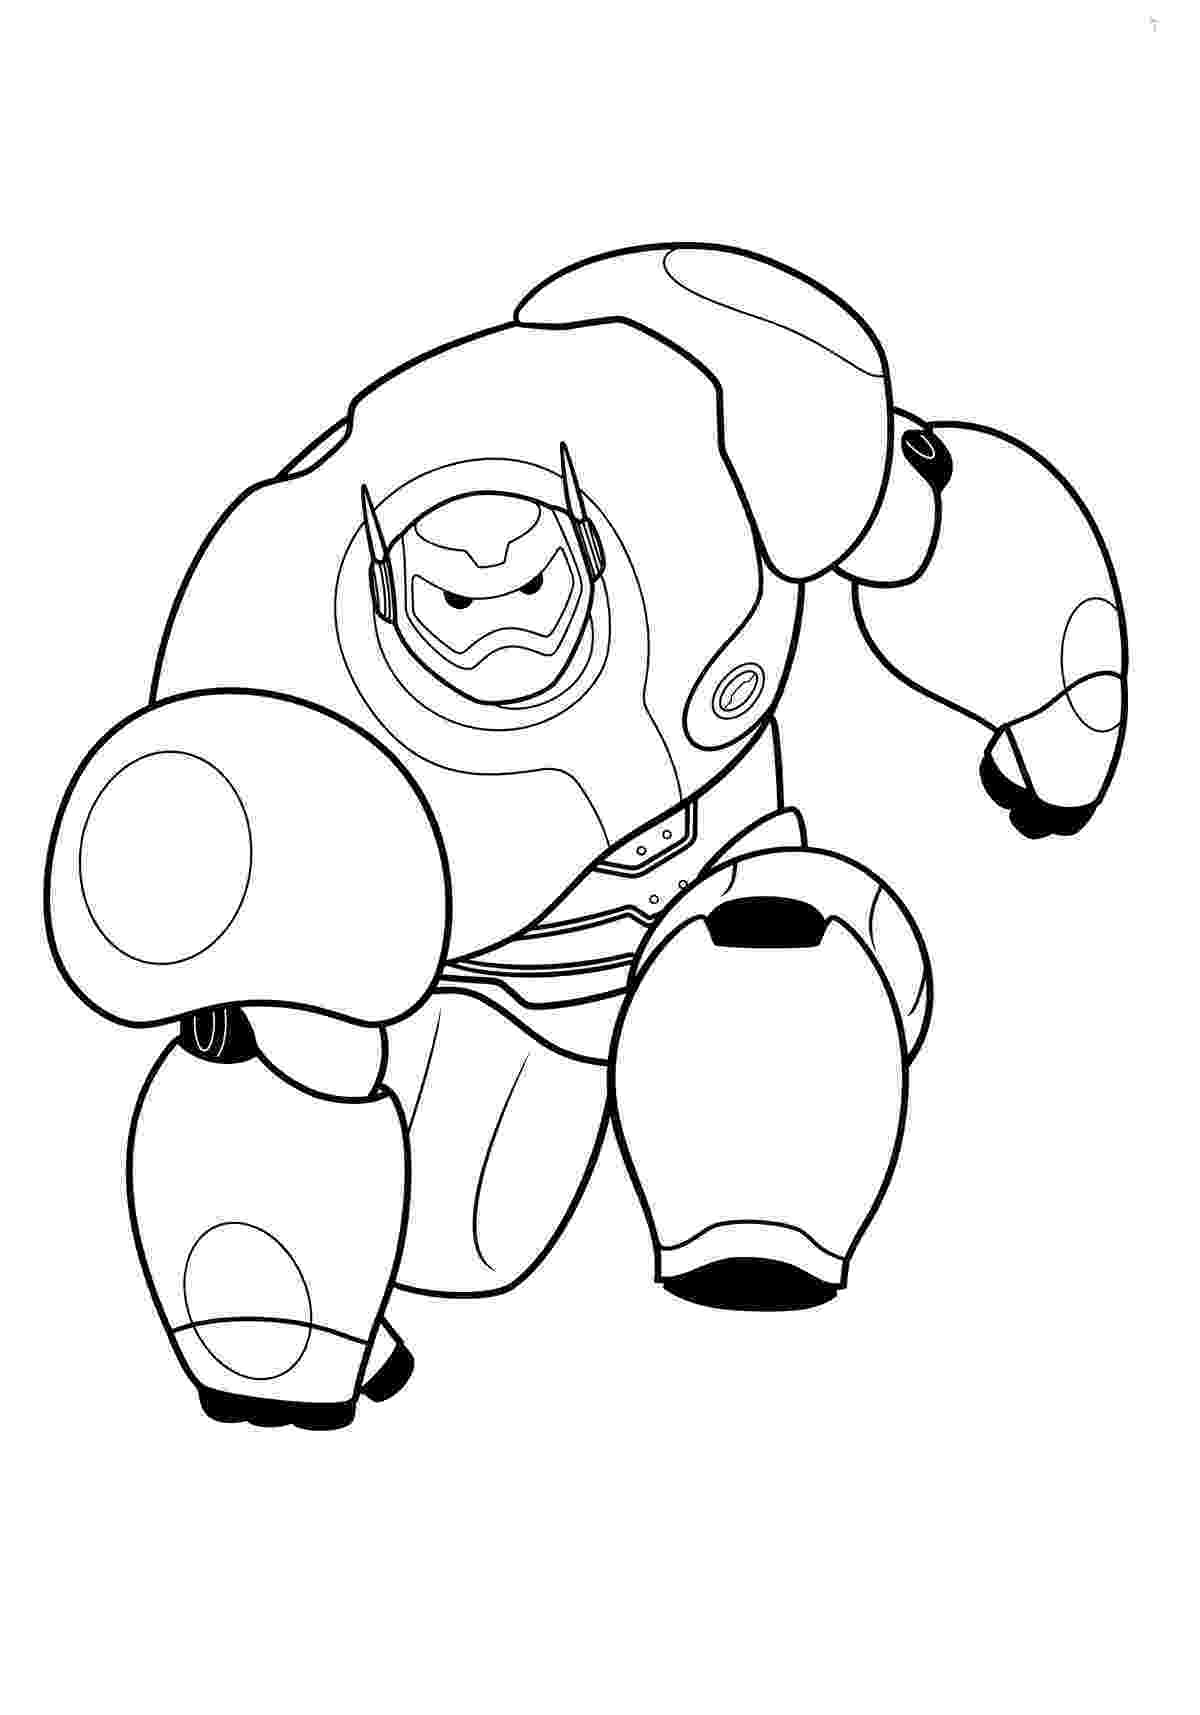 big hero 6 free colouring pages big hero 6 coloring pages to download and print for free hero free pages big 6 colouring 